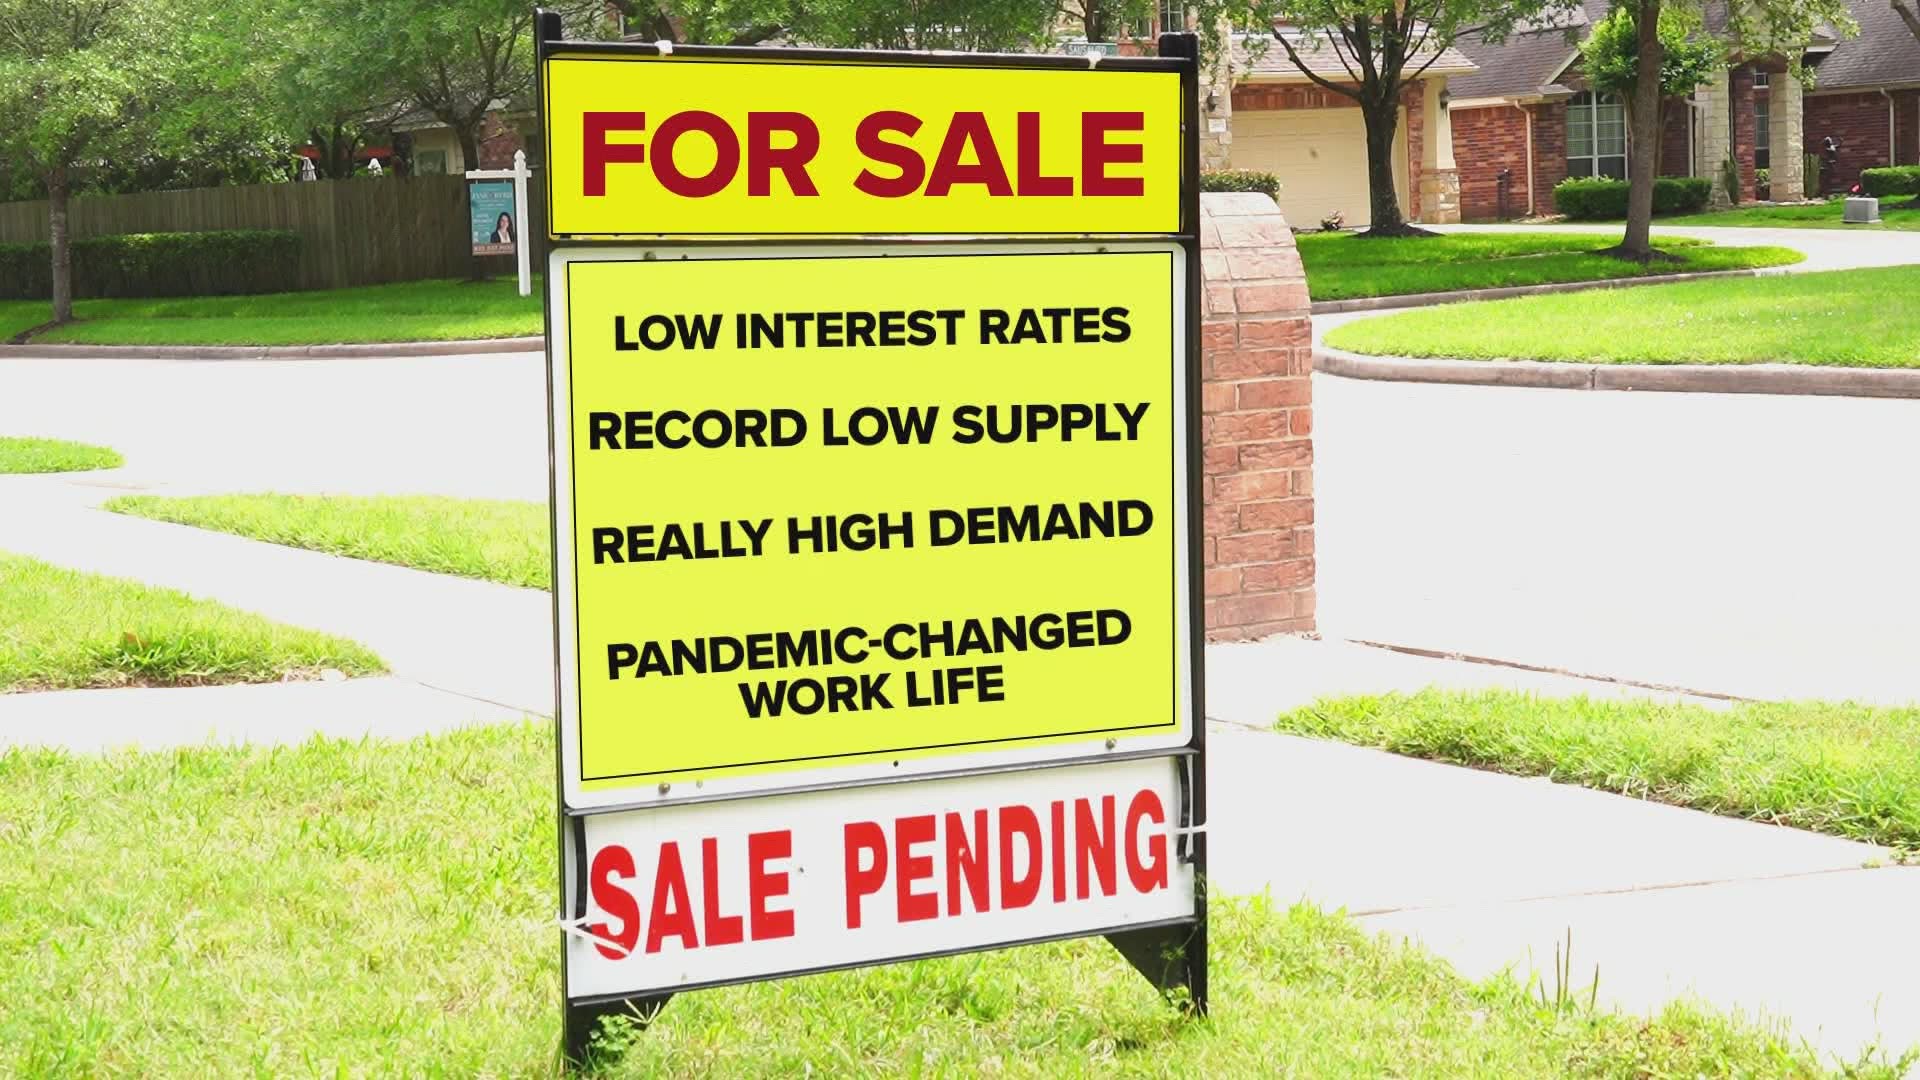 One realtor says we’re still seeing historically low-interest rates, record low supply, really high demand and a shift in work/home life because of the pandemic.